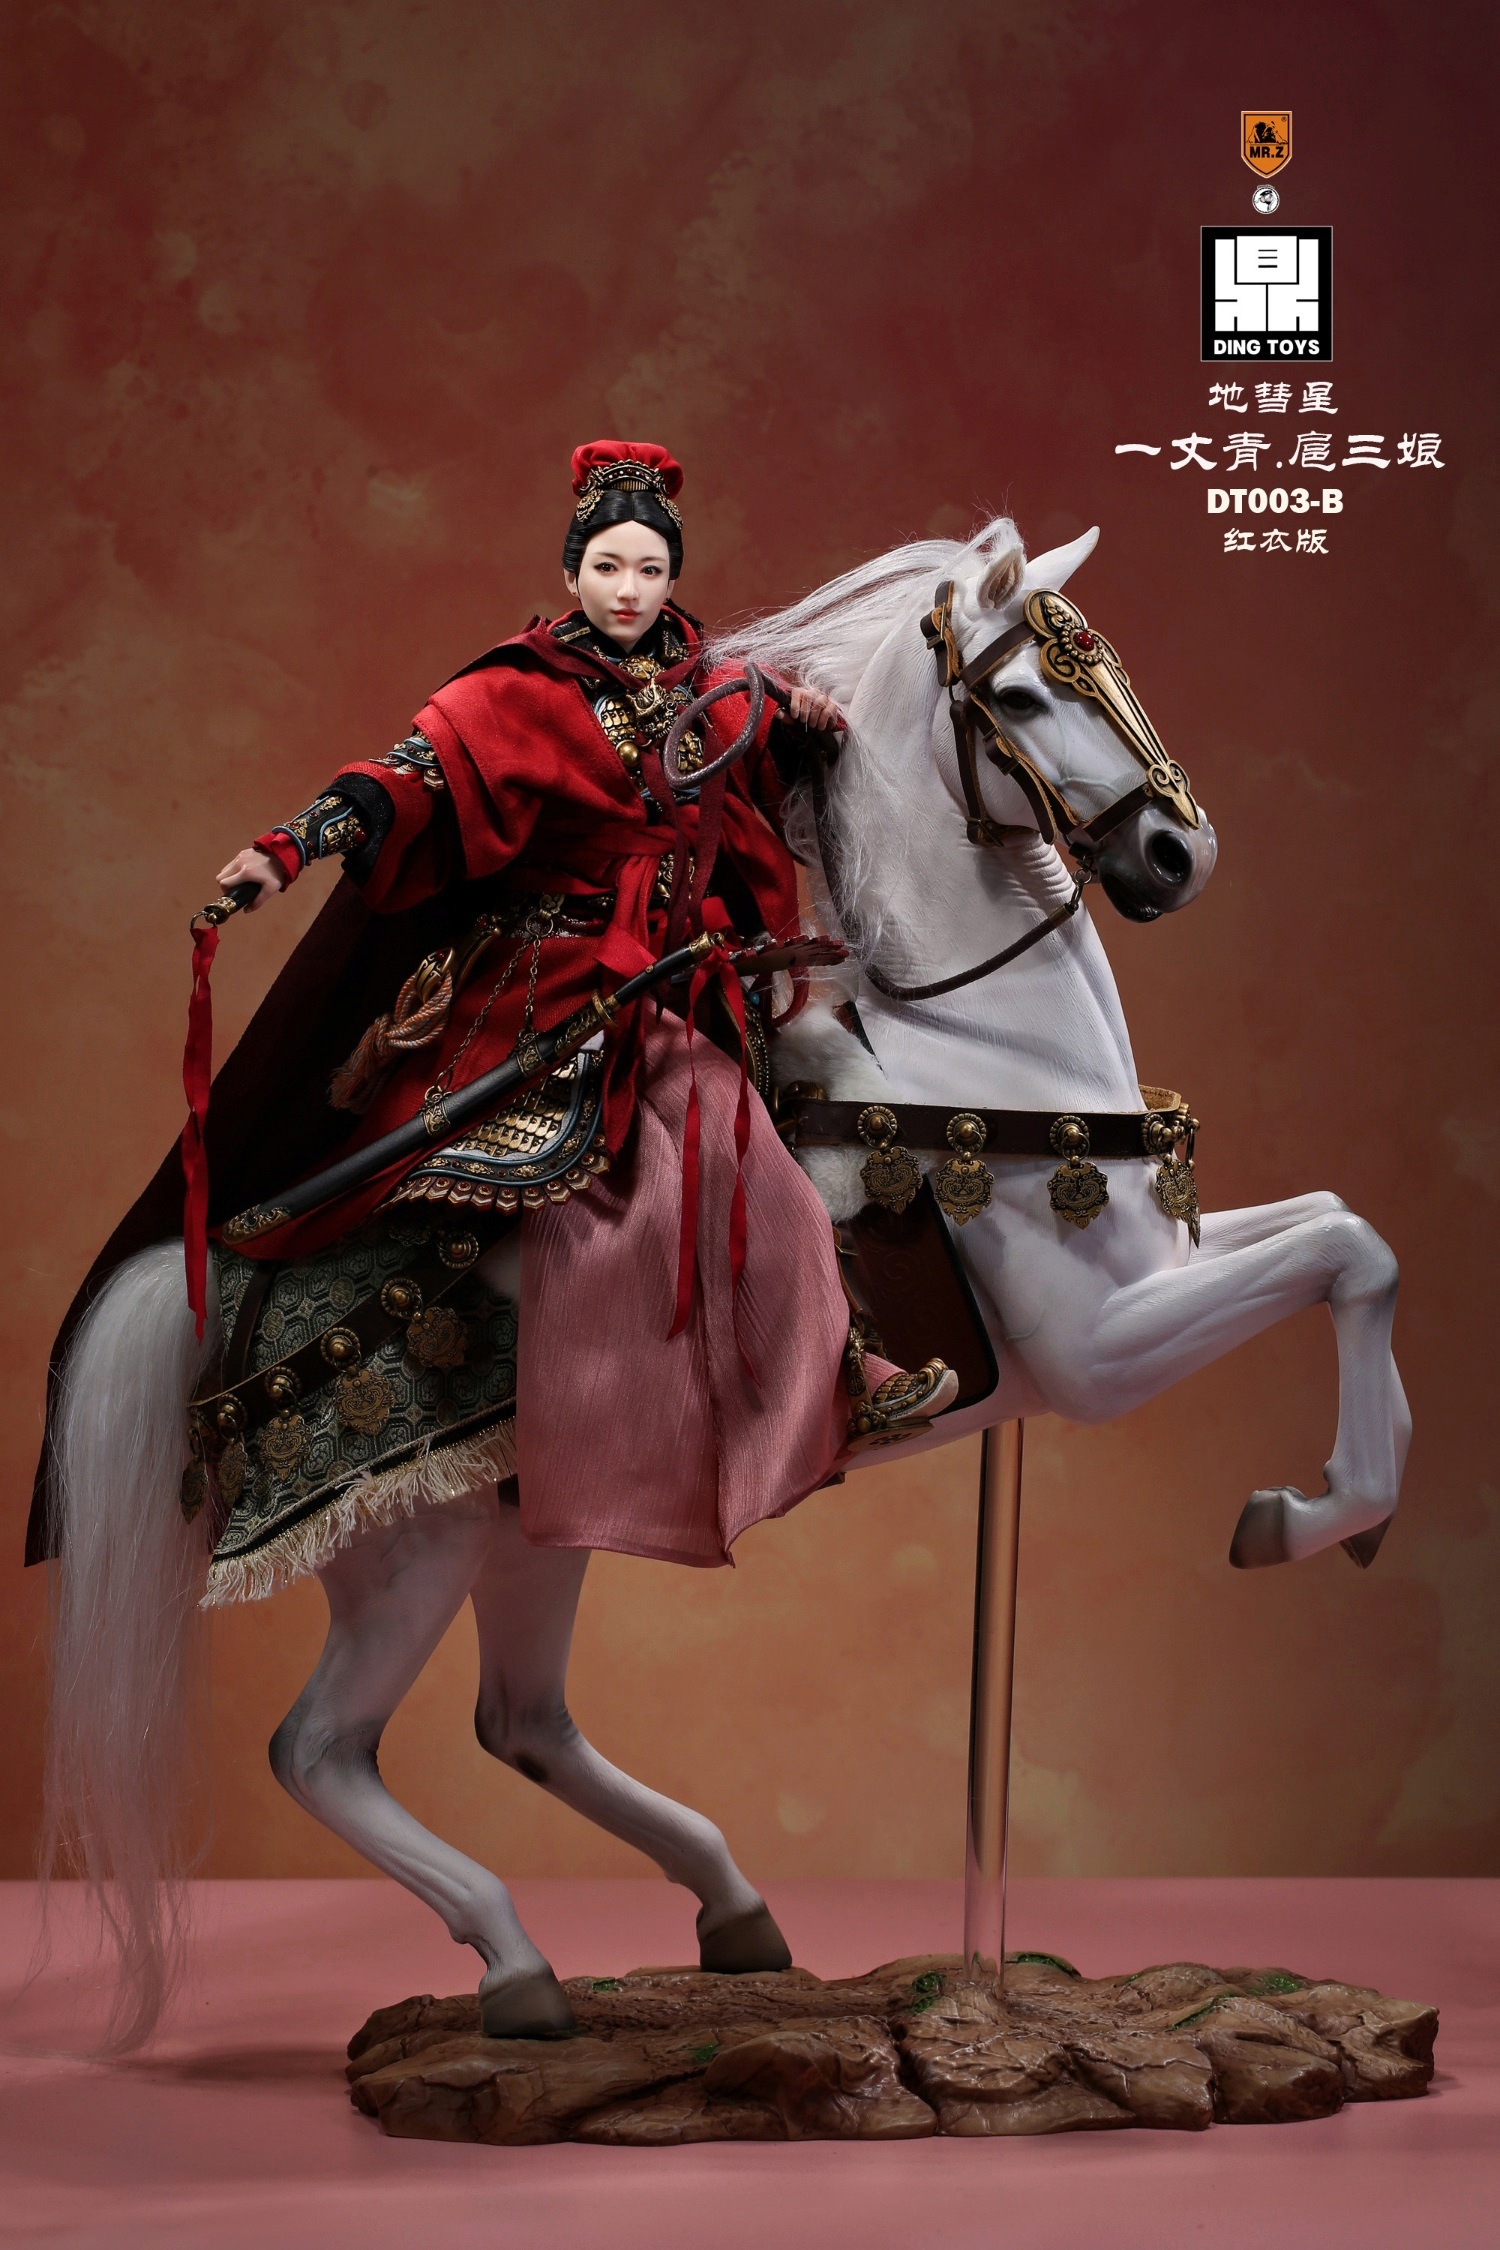 DingToys - NEW PRODUCT: Mr.Z x Ding Toys DT003 1/6 Scale 《Water Margin》Shiying Zhang (Green and Red versions), Horse (White) 3626